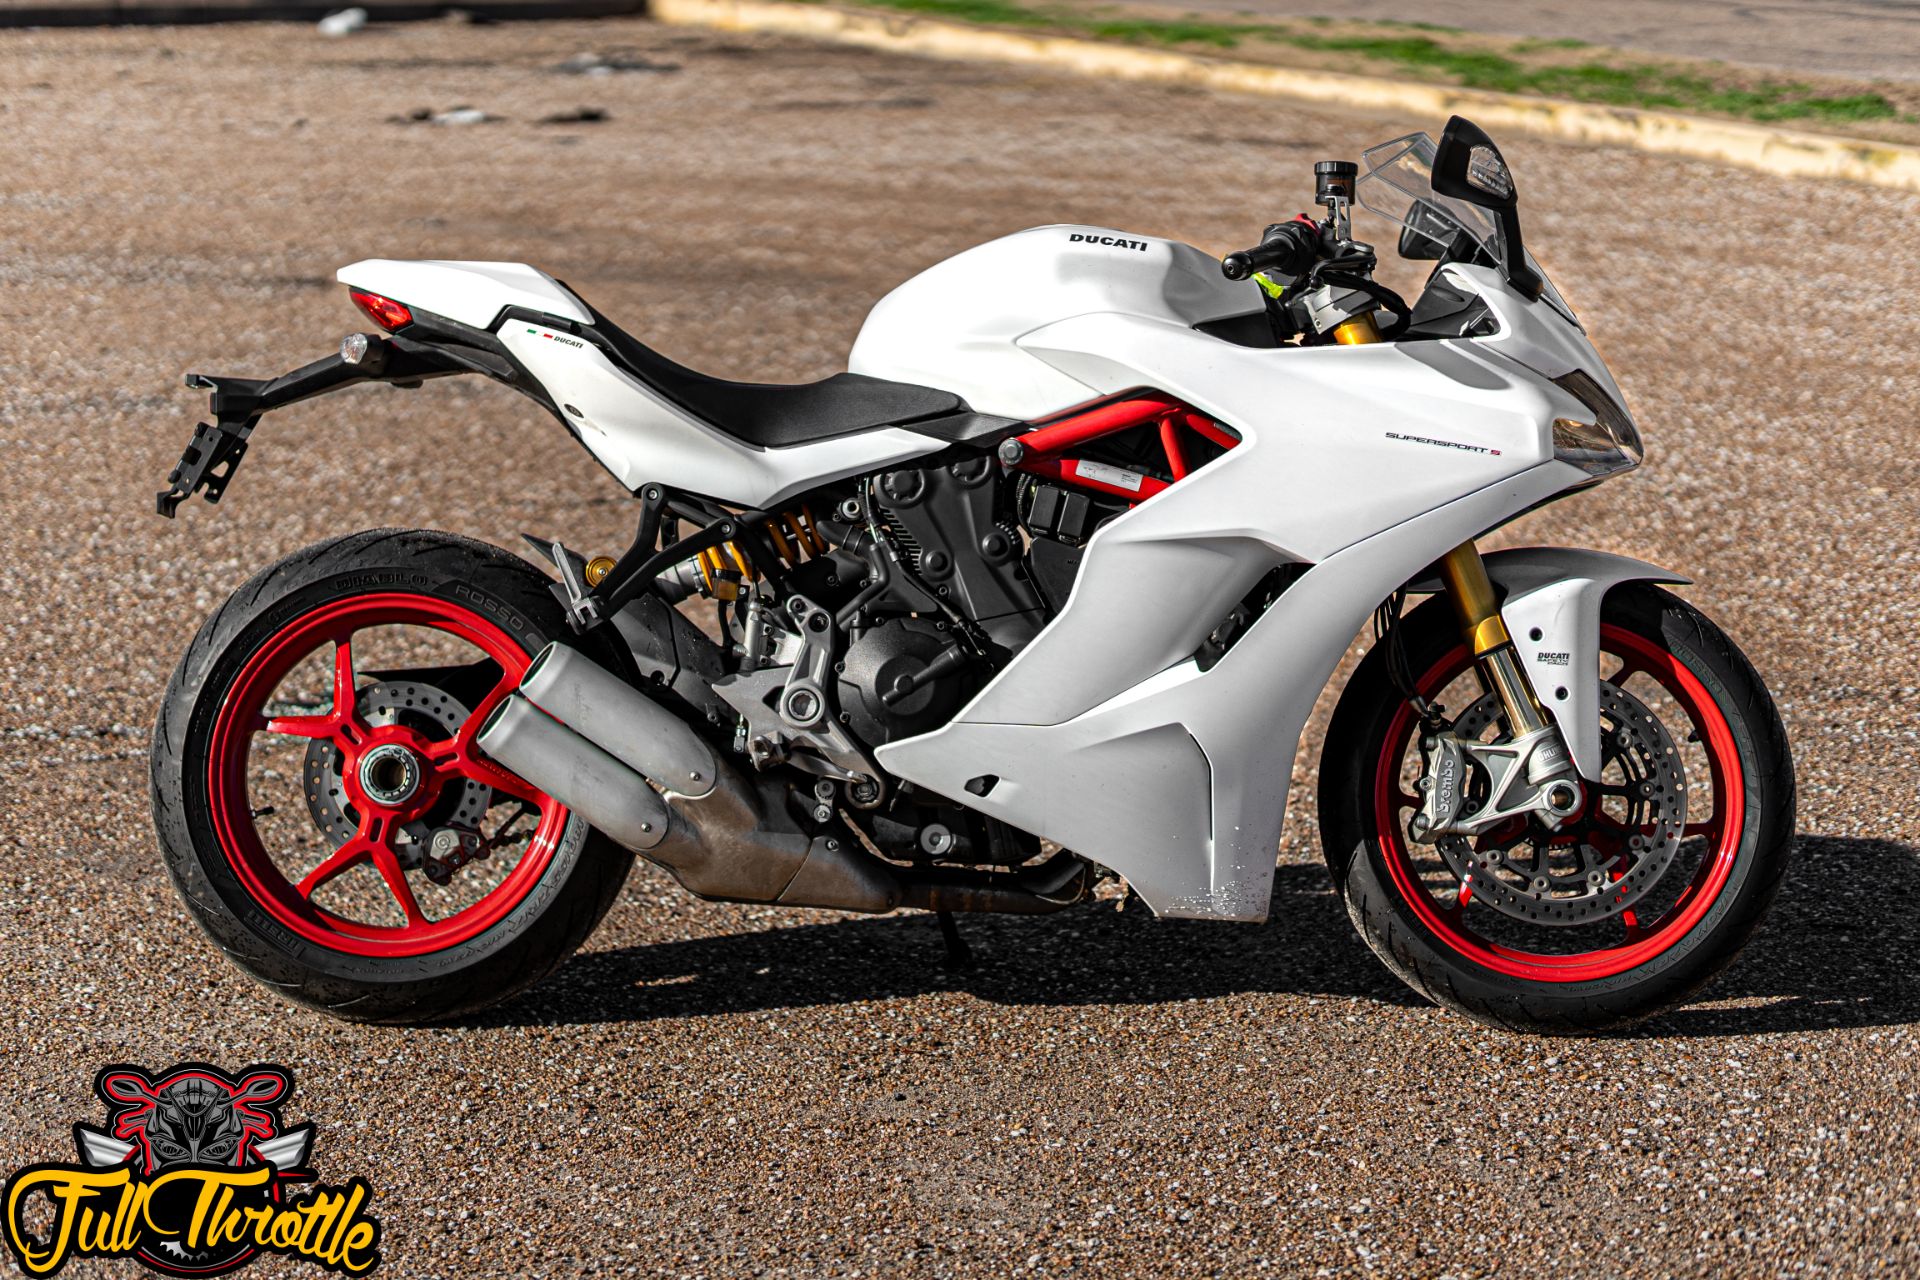 2018 Ducati SuperSport S in Houston, Texas - Photo 2